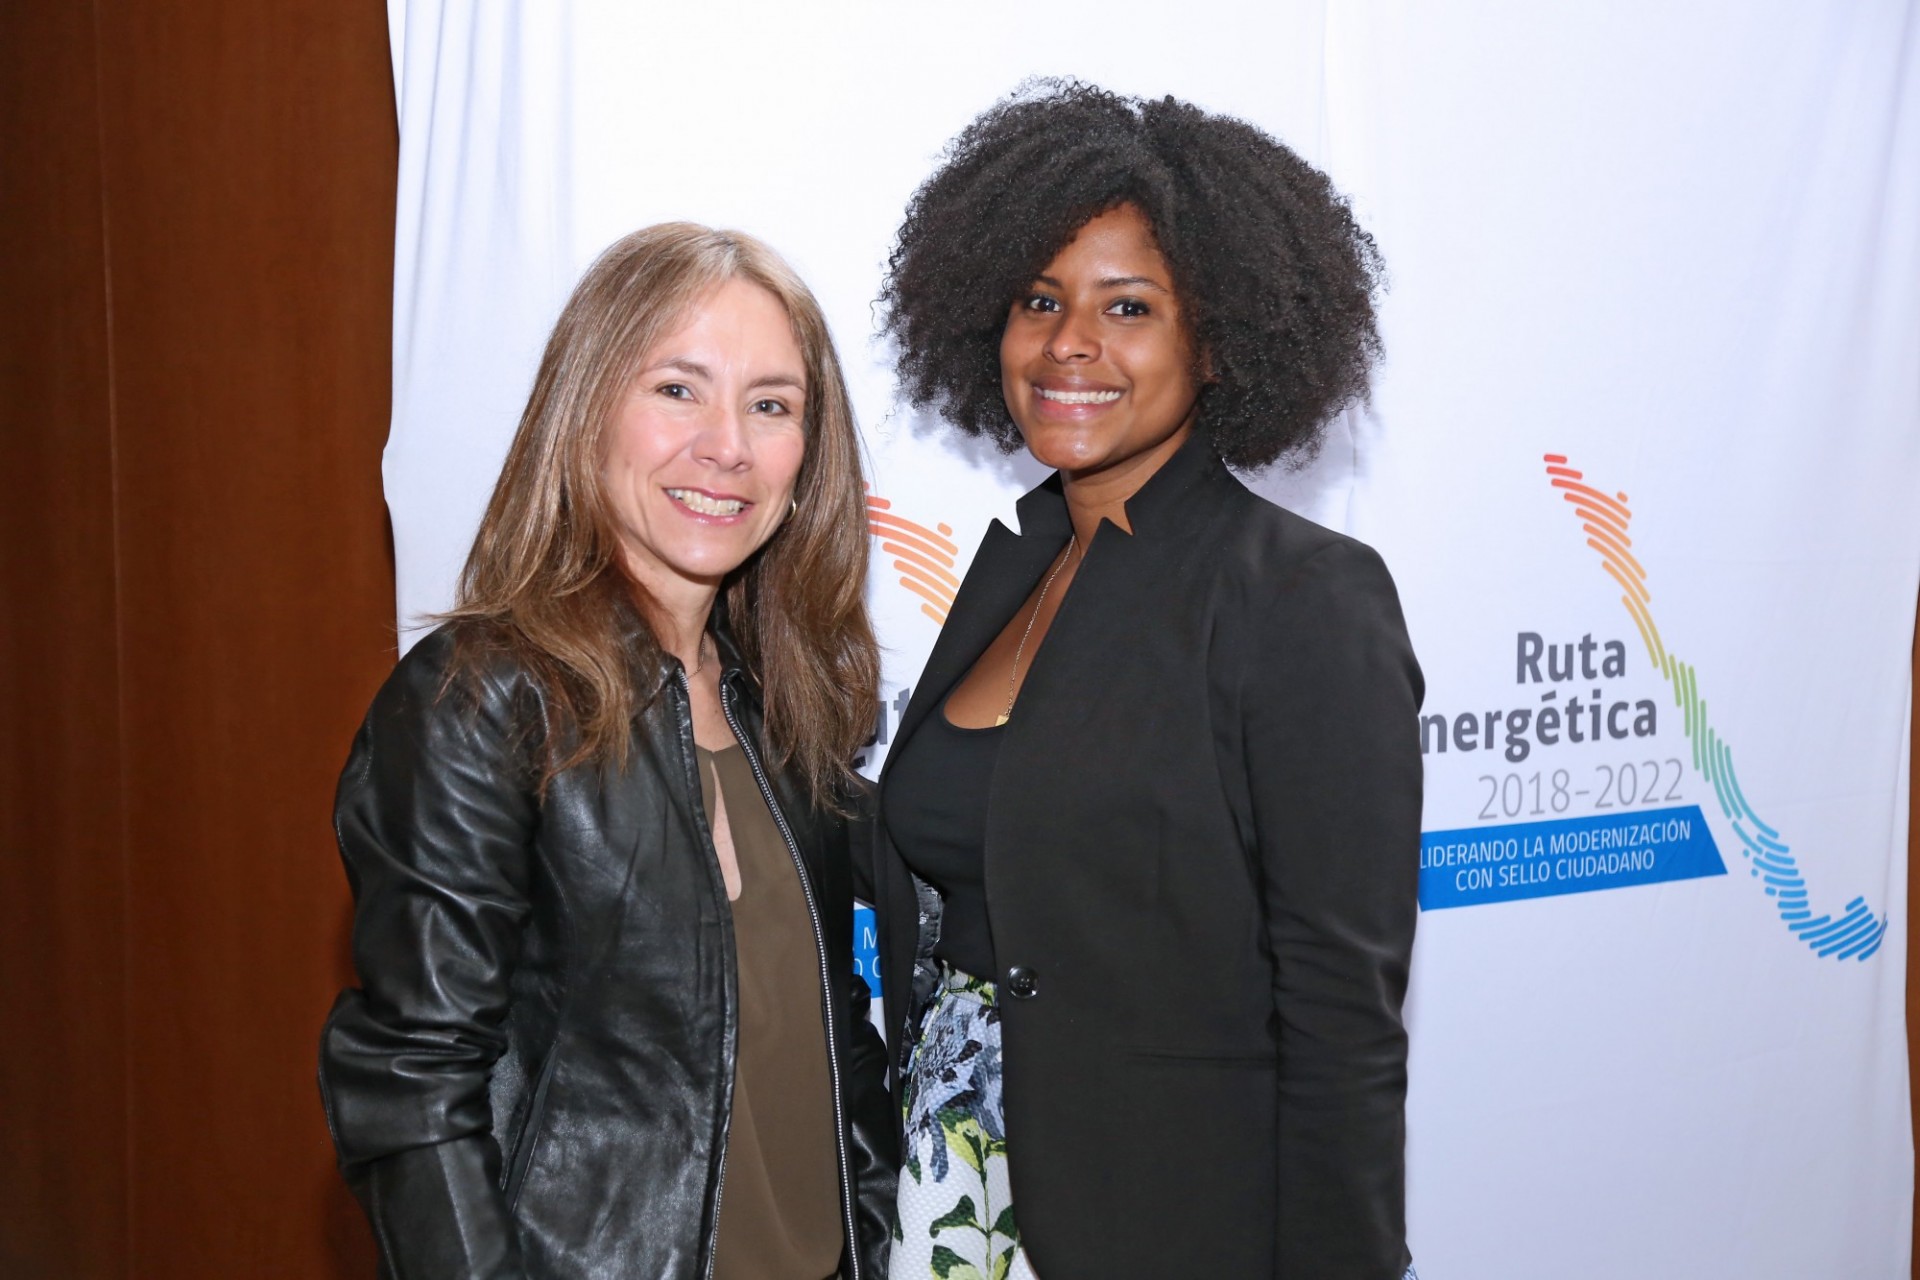 Susana Jiménez, Chile’s Minister of Energy, and Jully Meriño, director of the Women in Energy Program at Columbia